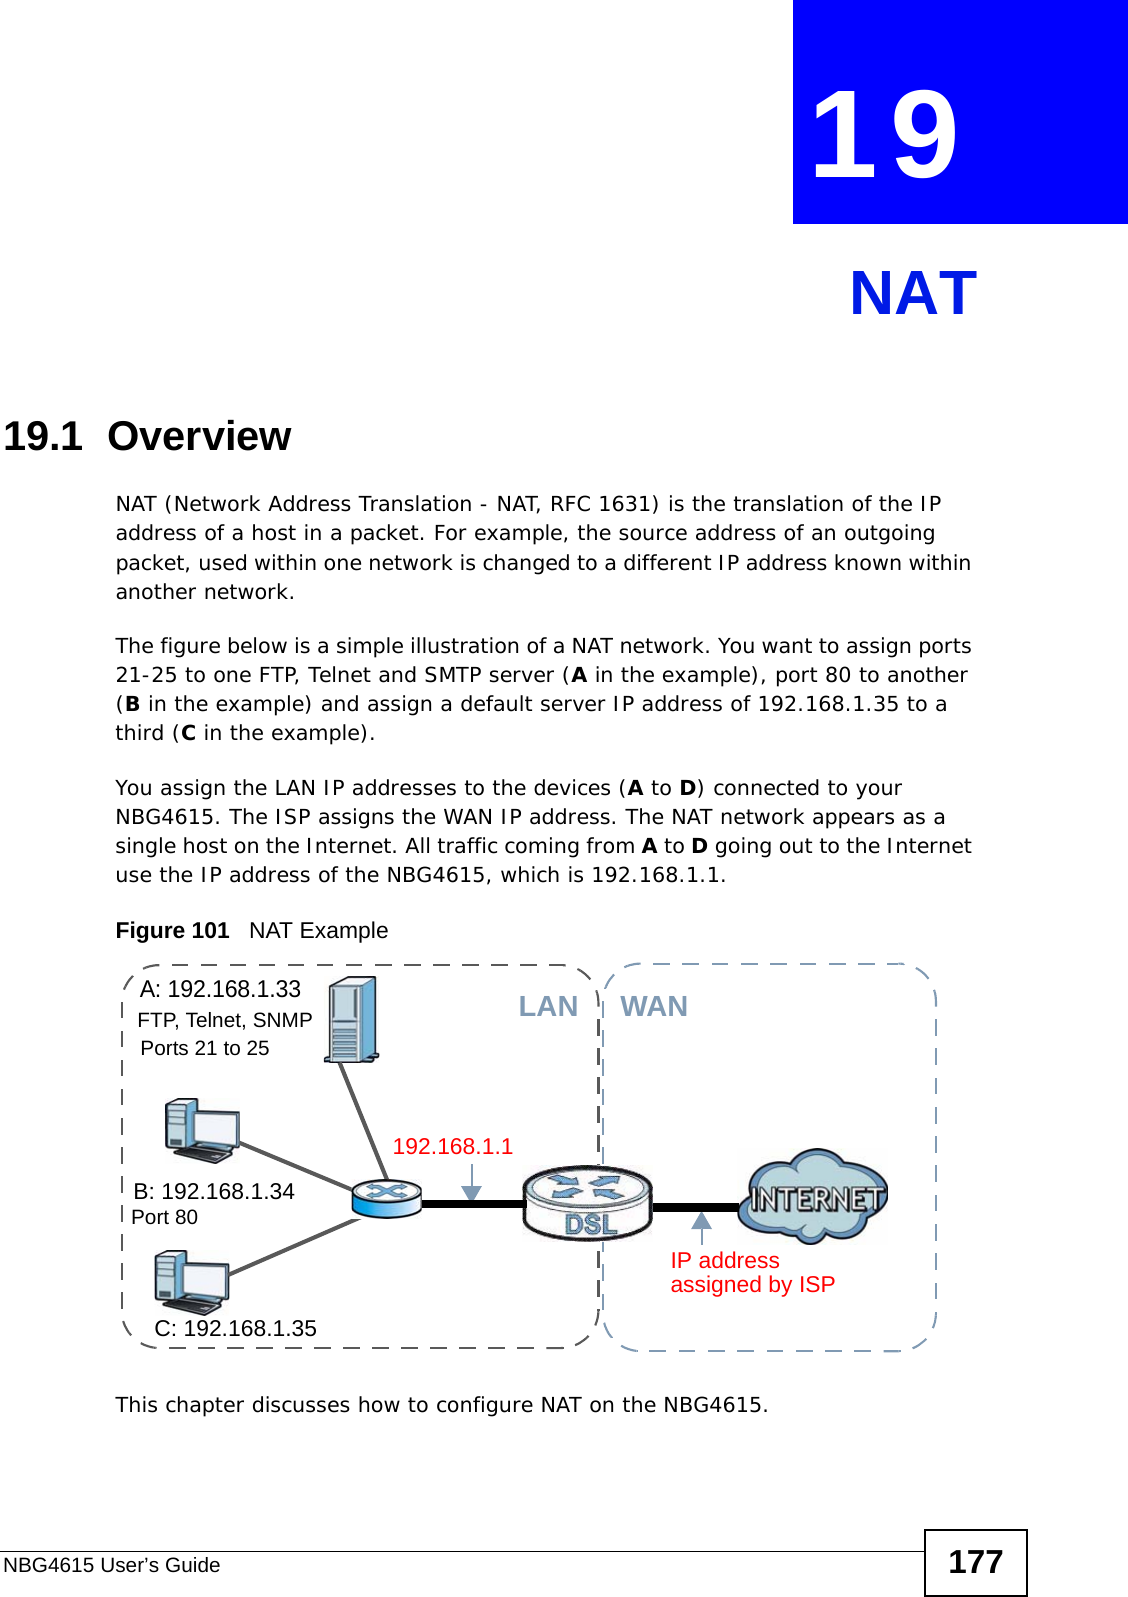 NBG4615 User’s Guide 177CHAPTER  19 NAT19.1  Overview   NAT (Network Address Translation - NAT, RFC 1631) is the translation of the IP address of a host in a packet. For example, the source address of an outgoing packet, used within one network is changed to a different IP address known within another network.The figure below is a simple illustration of a NAT network. You want to assign ports 21-25 to one FTP, Telnet and SMTP server (A in the example), port 80 to another (B in the example) and assign a default server IP address of 192.168.1.35 to a third (C in the example). You assign the LAN IP addresses to the devices (A to D) connected to your NBG4615. The ISP assigns the WAN IP address. The NAT network appears as a single host on the Internet. All traffic coming from A to D going out to the Internet use the IP address of the NBG4615, which is 192.168.1.1.Figure 101   NAT ExampleThis chapter discusses how to configure NAT on the NBG4615.A: 192.168.1.33B: 192.168.1.34C: 192.168.1.35IP address 192.168.1.1WANLANassigned by ISPFTP, Telnet, SNMPPort 80Ports 21 to 25